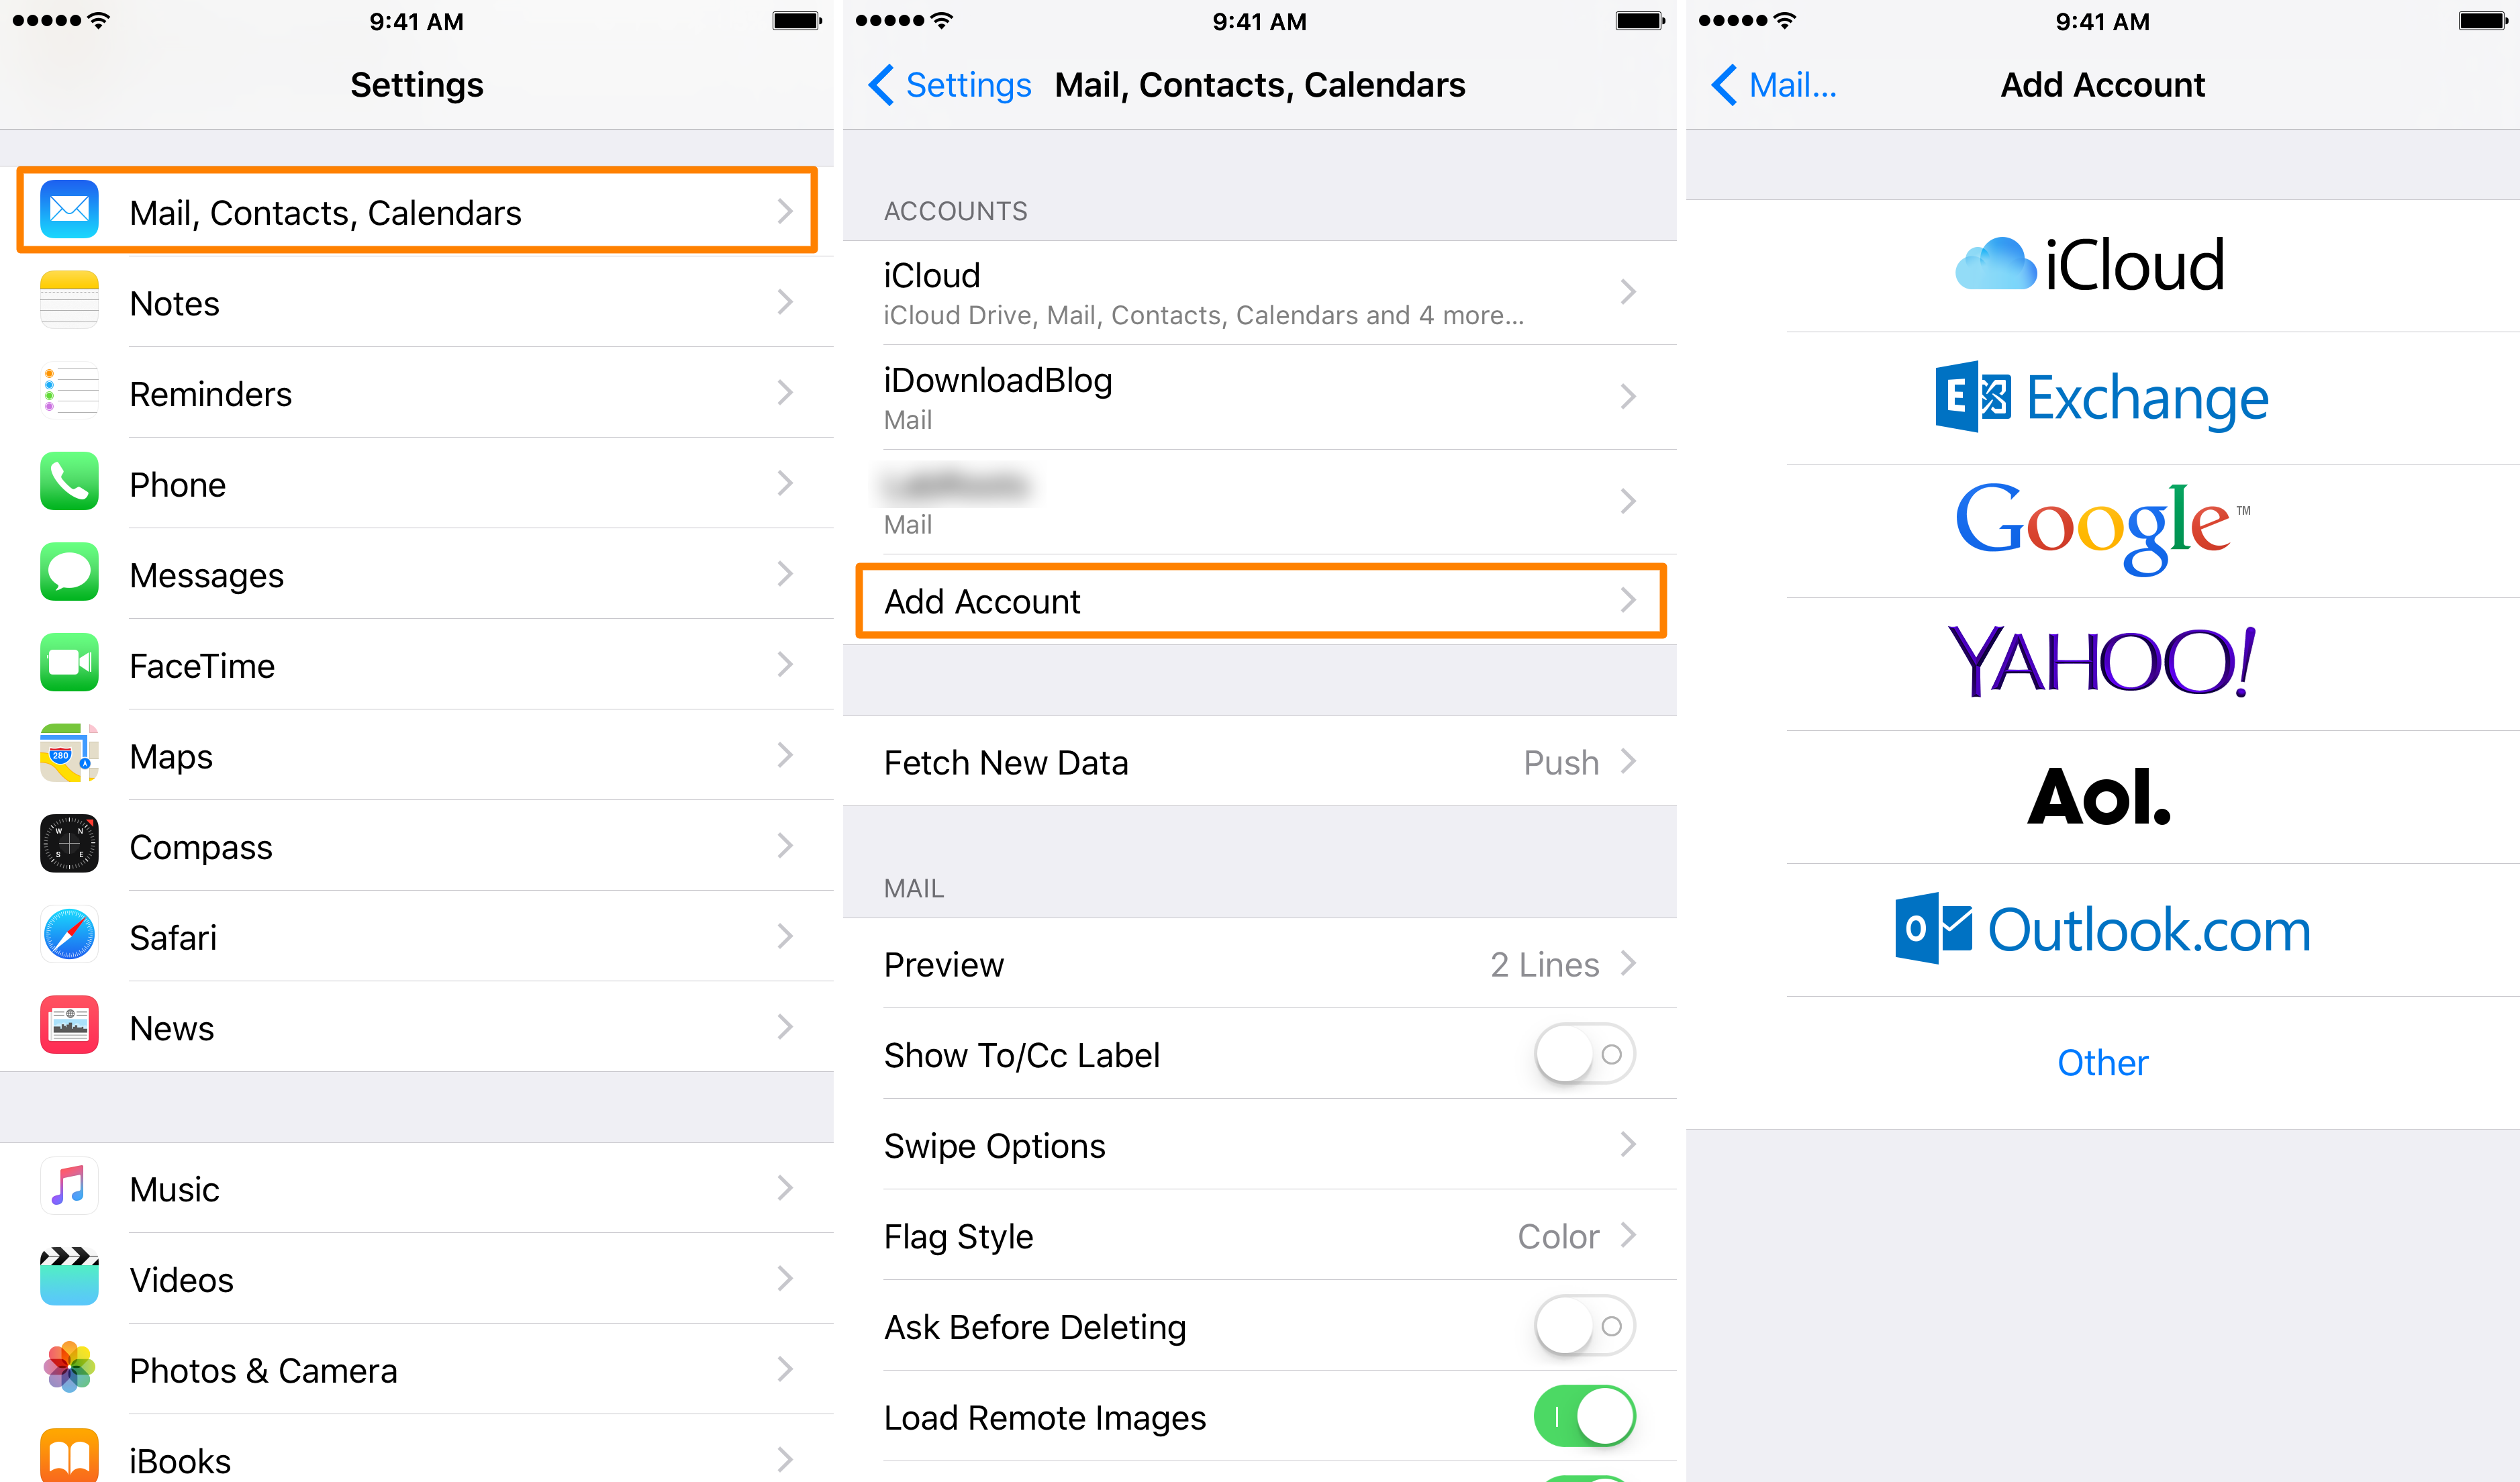 add new email account in iOS mail app